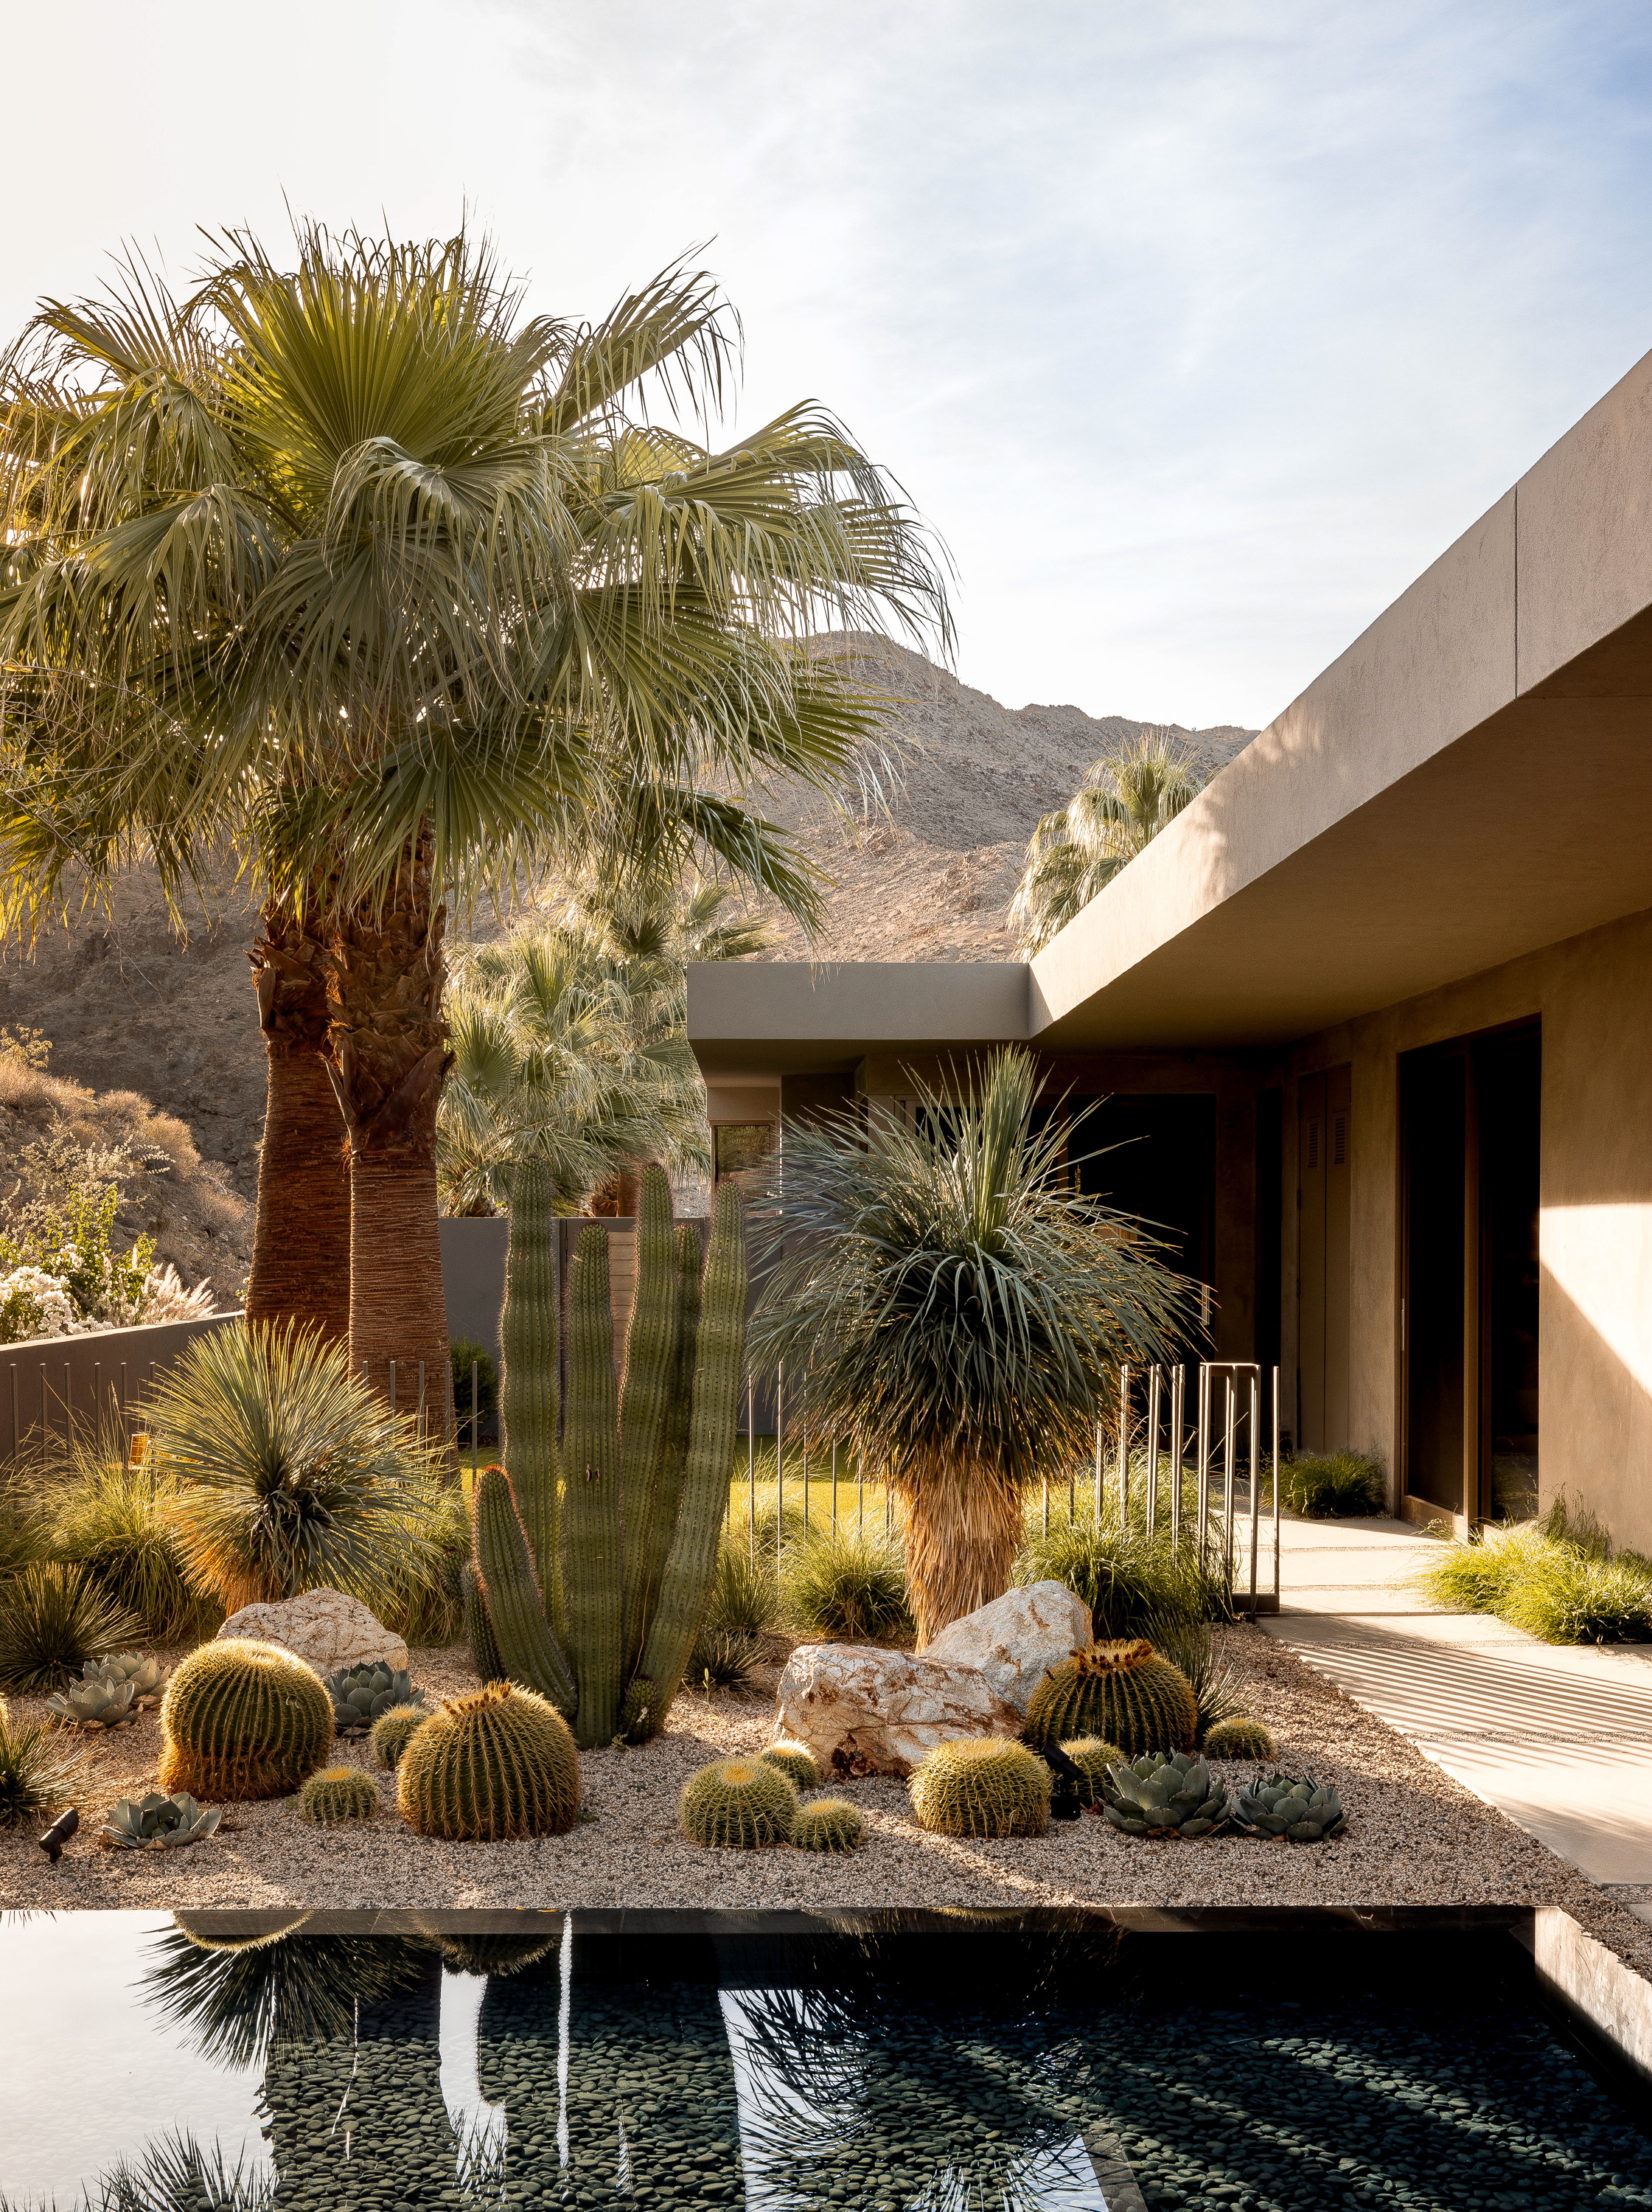 A serene oasis welcomes guests with a tranquil reflection pool surrounded by a vibrant cactus garden, setting the tone for the desert luxury within.